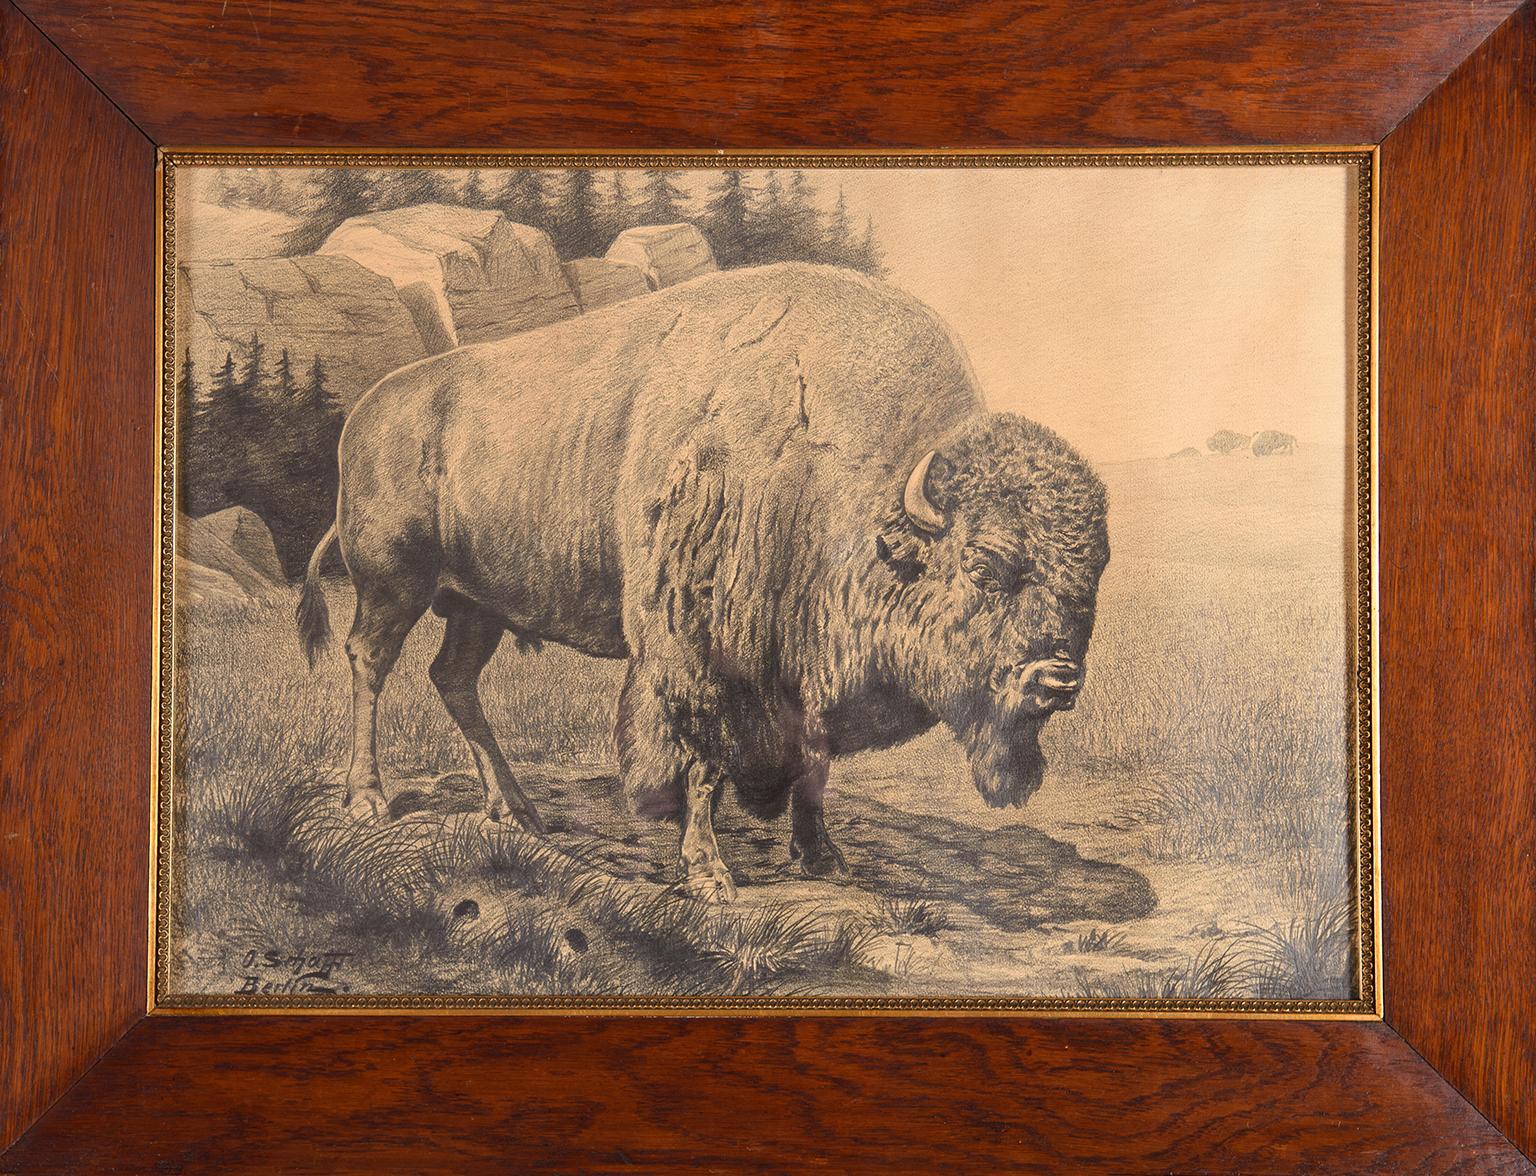 Bison in a landscape - 20th century pencil drawing by Oscar Schafft 3